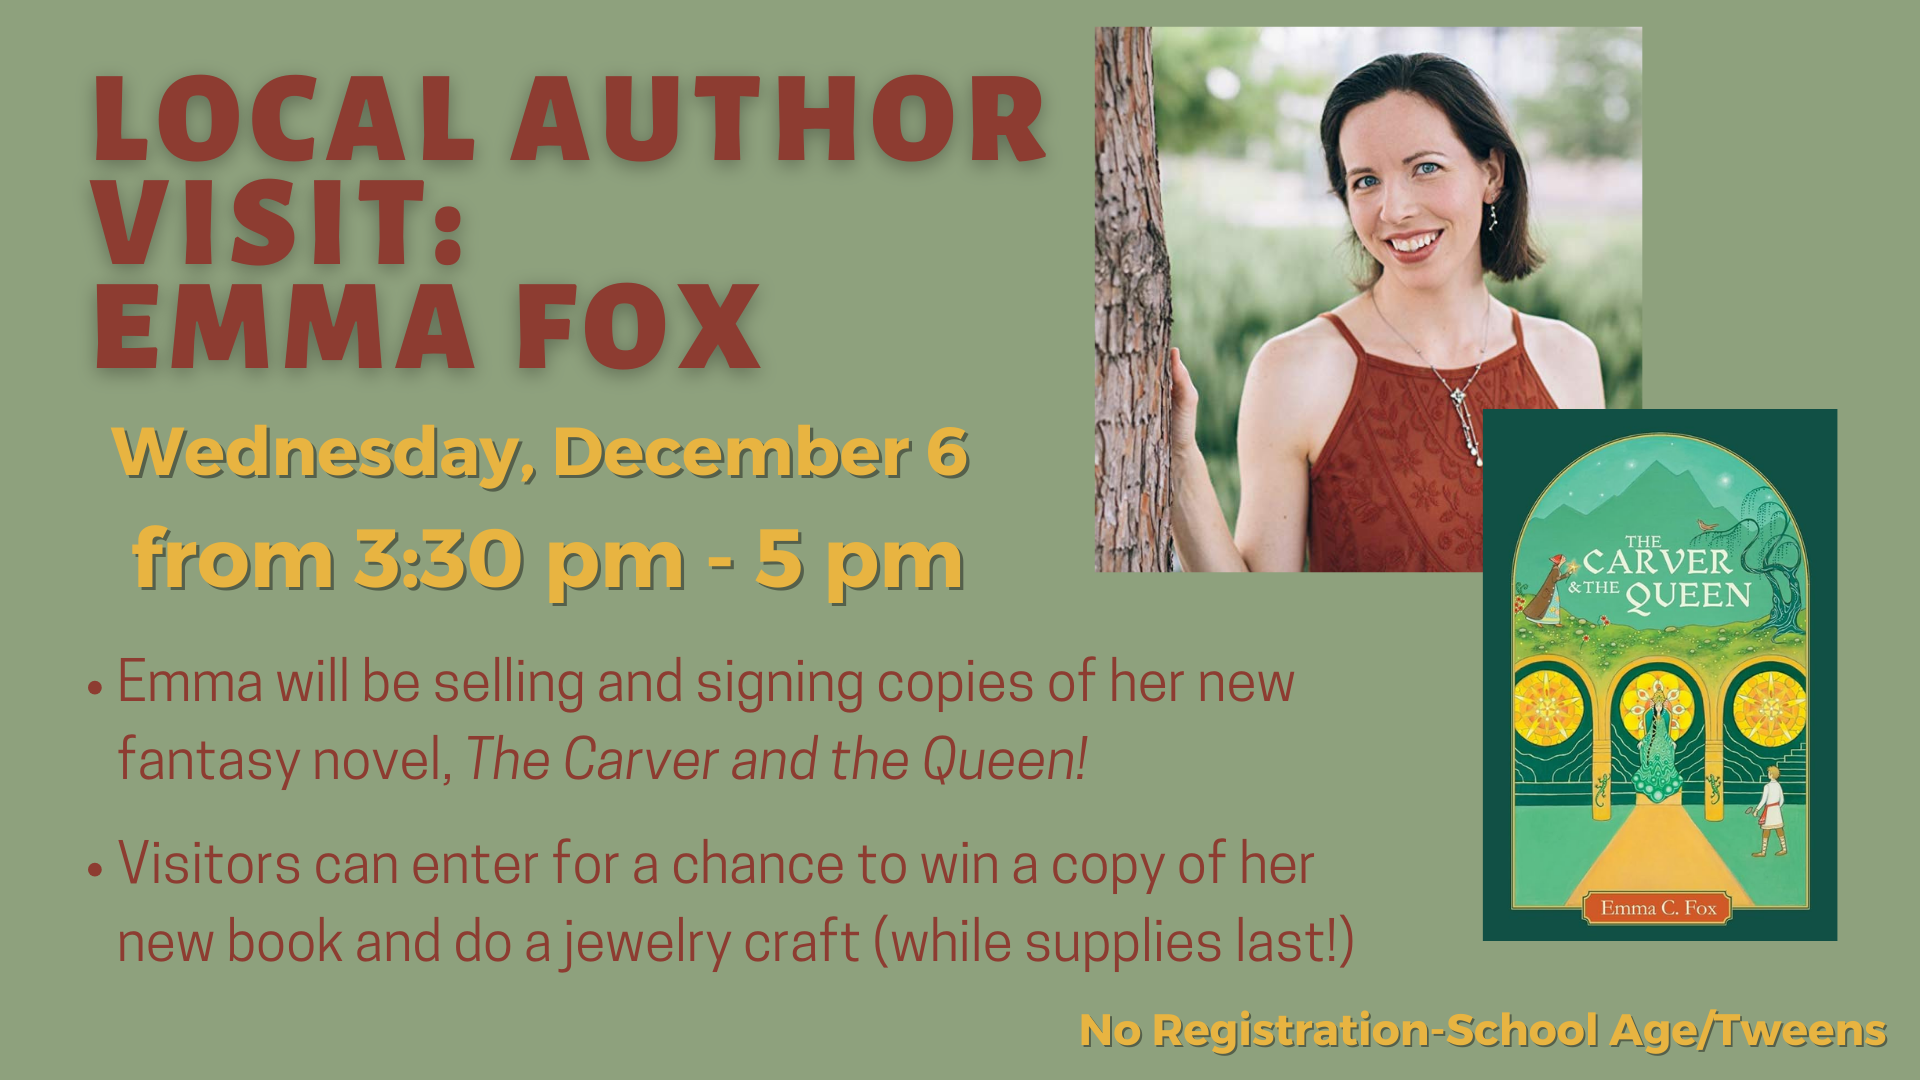 Graphic with a sage green background featuring a picture of local author Emma Fox and an image of the cover of her new book The Carver and the Queen. The text gives information about her visit to the library.